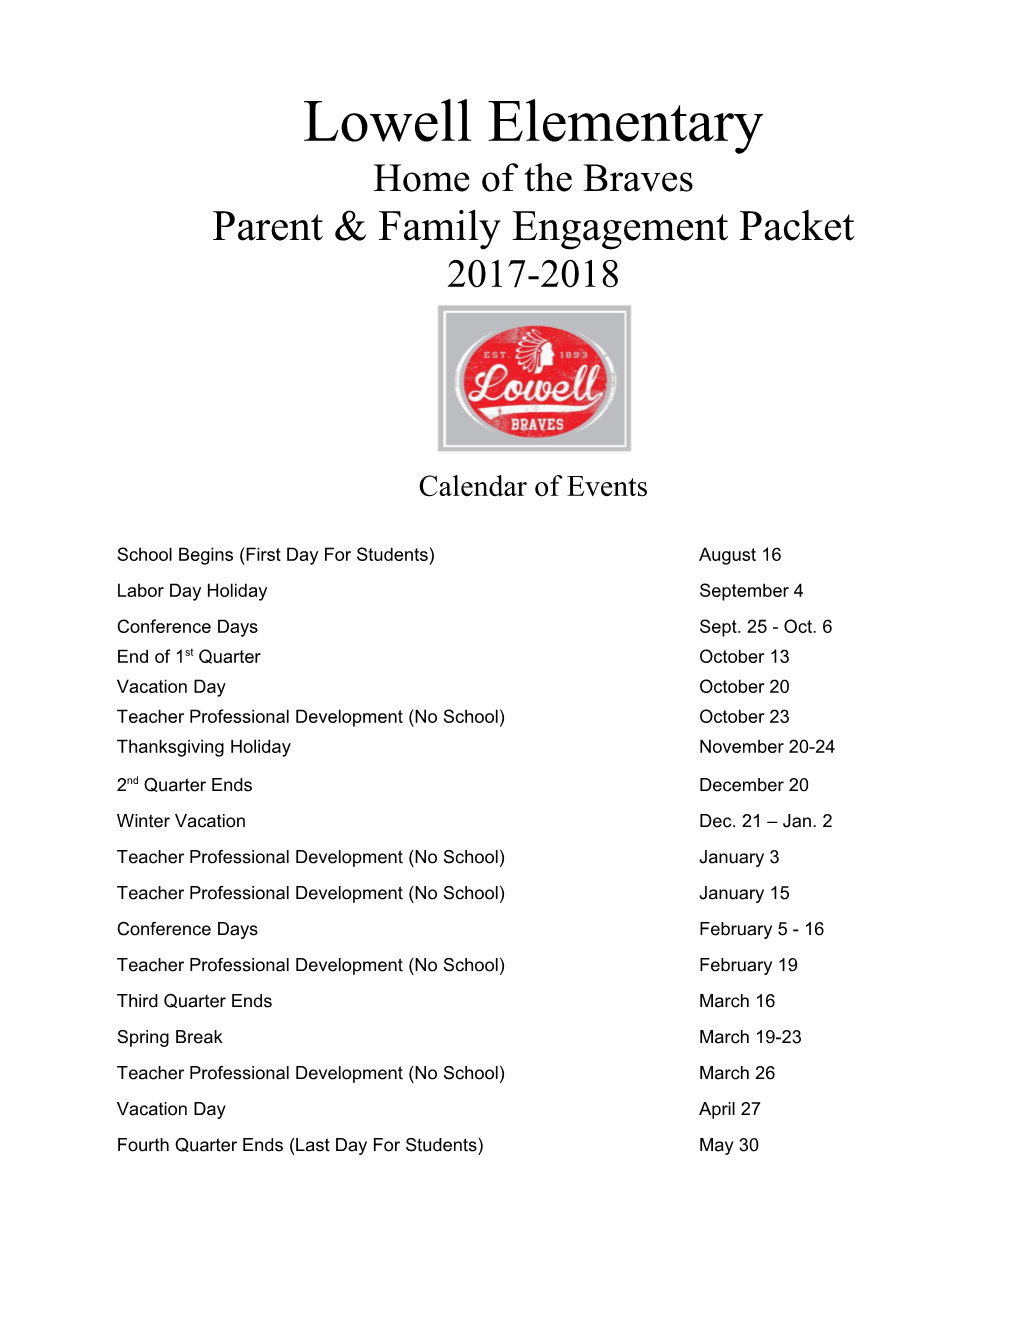 Parent & Family Engagement Packet